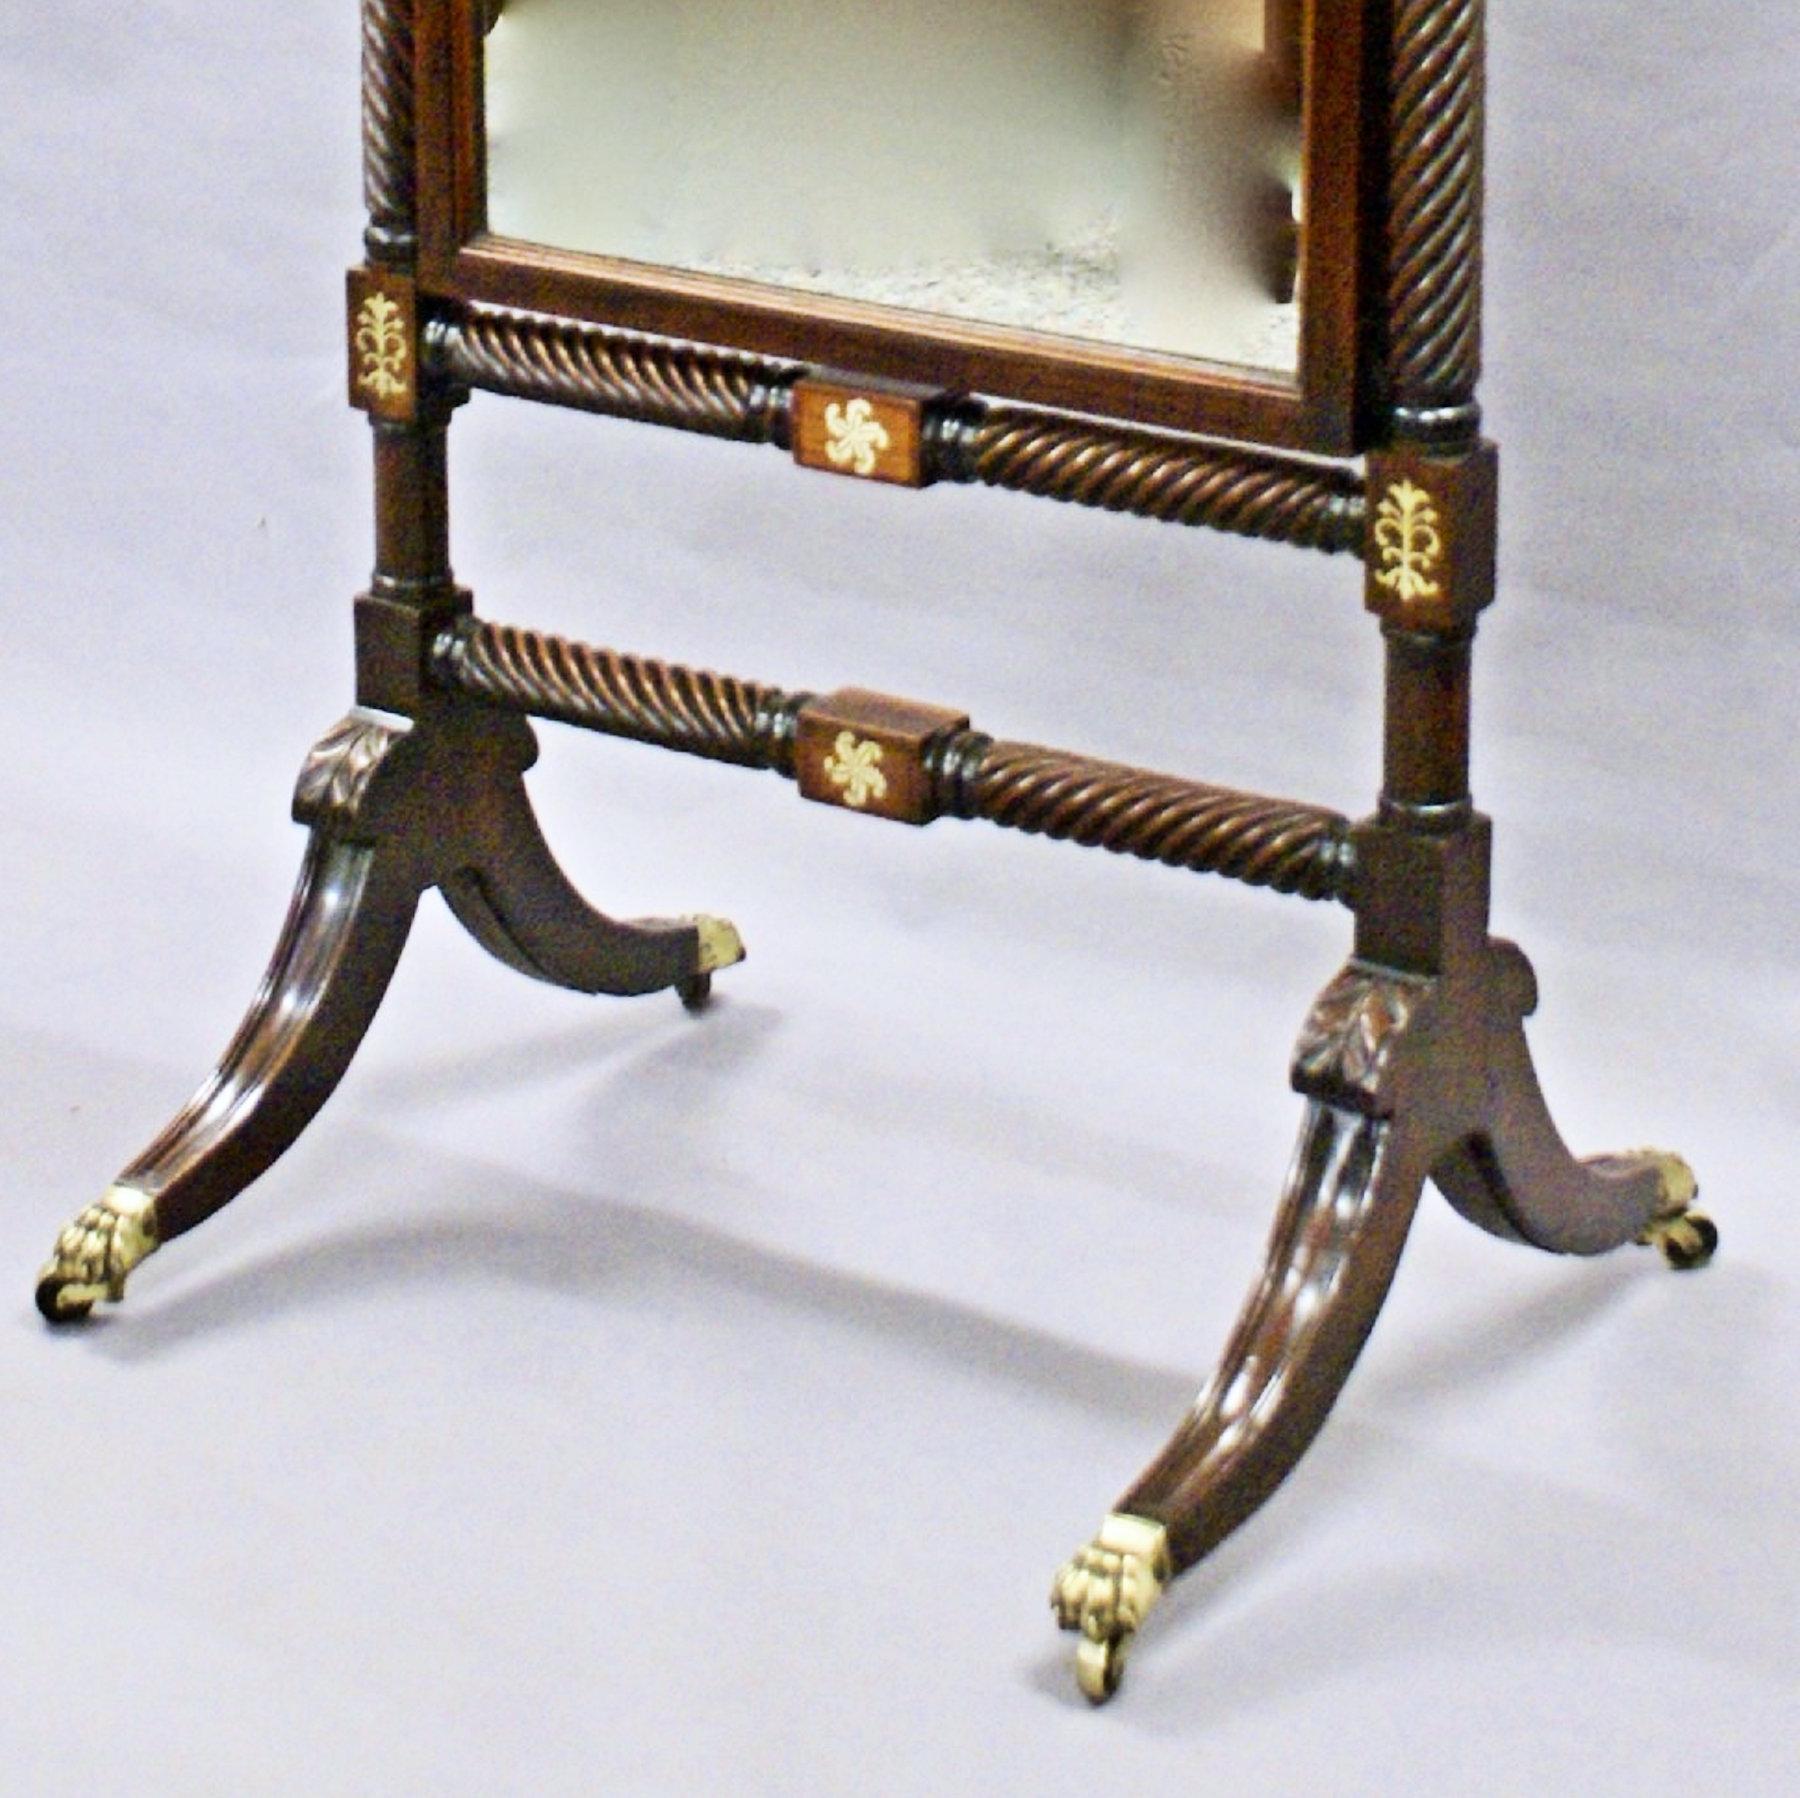 This beautiful and stylish fine quality early 19th century rosewood cheval mirror features lovely brass inlay with brass floral decor and the original mirror supported on raised sabre legs, carved knees and brass claw castors. The mercury plate